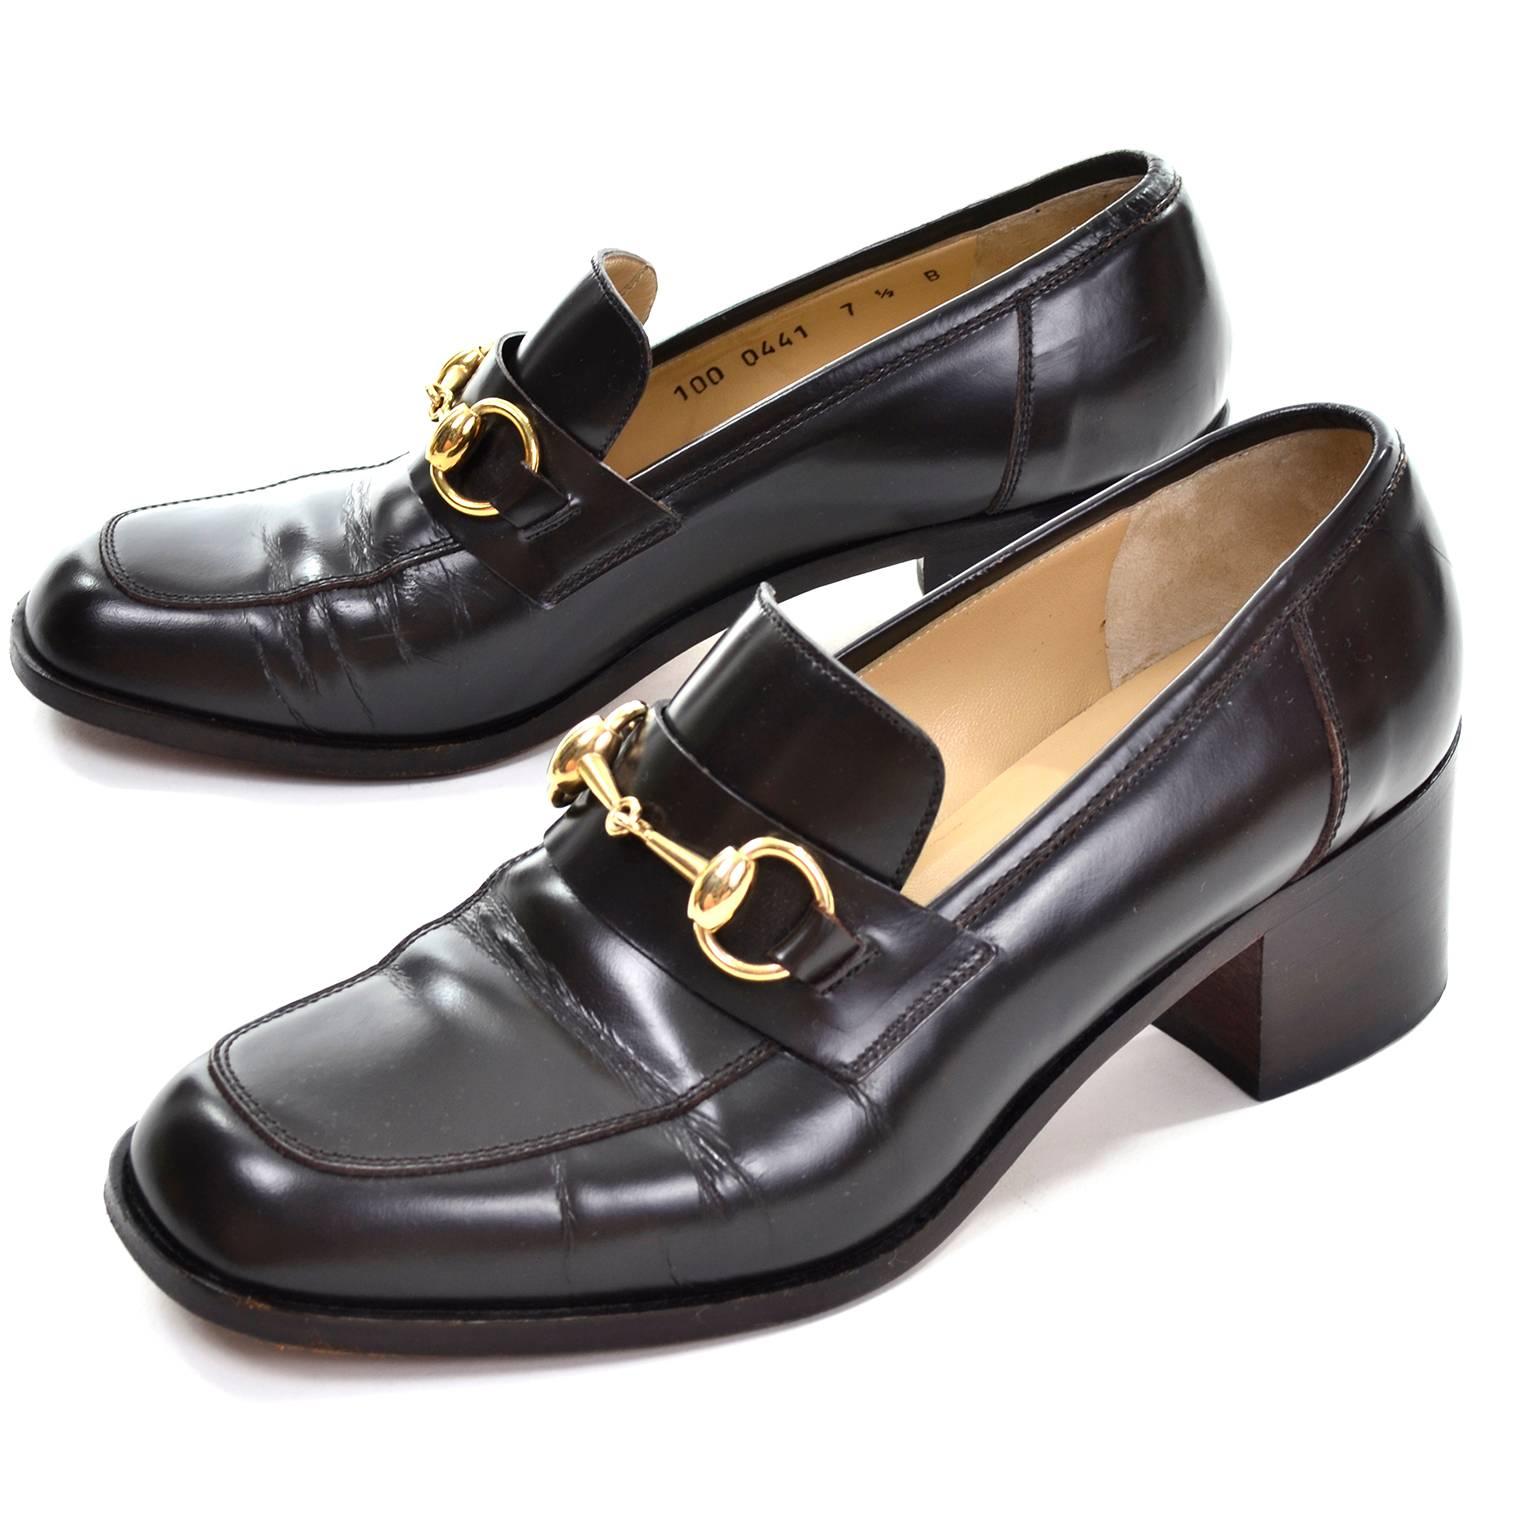 These classic brown leather vintage Gucci loafers have beautiful horsebit brass buckles and 2 inch chunky heels. These timeless shoes were made in Italy and are marked a size 7 and 1/2 and are 3 and 1/4